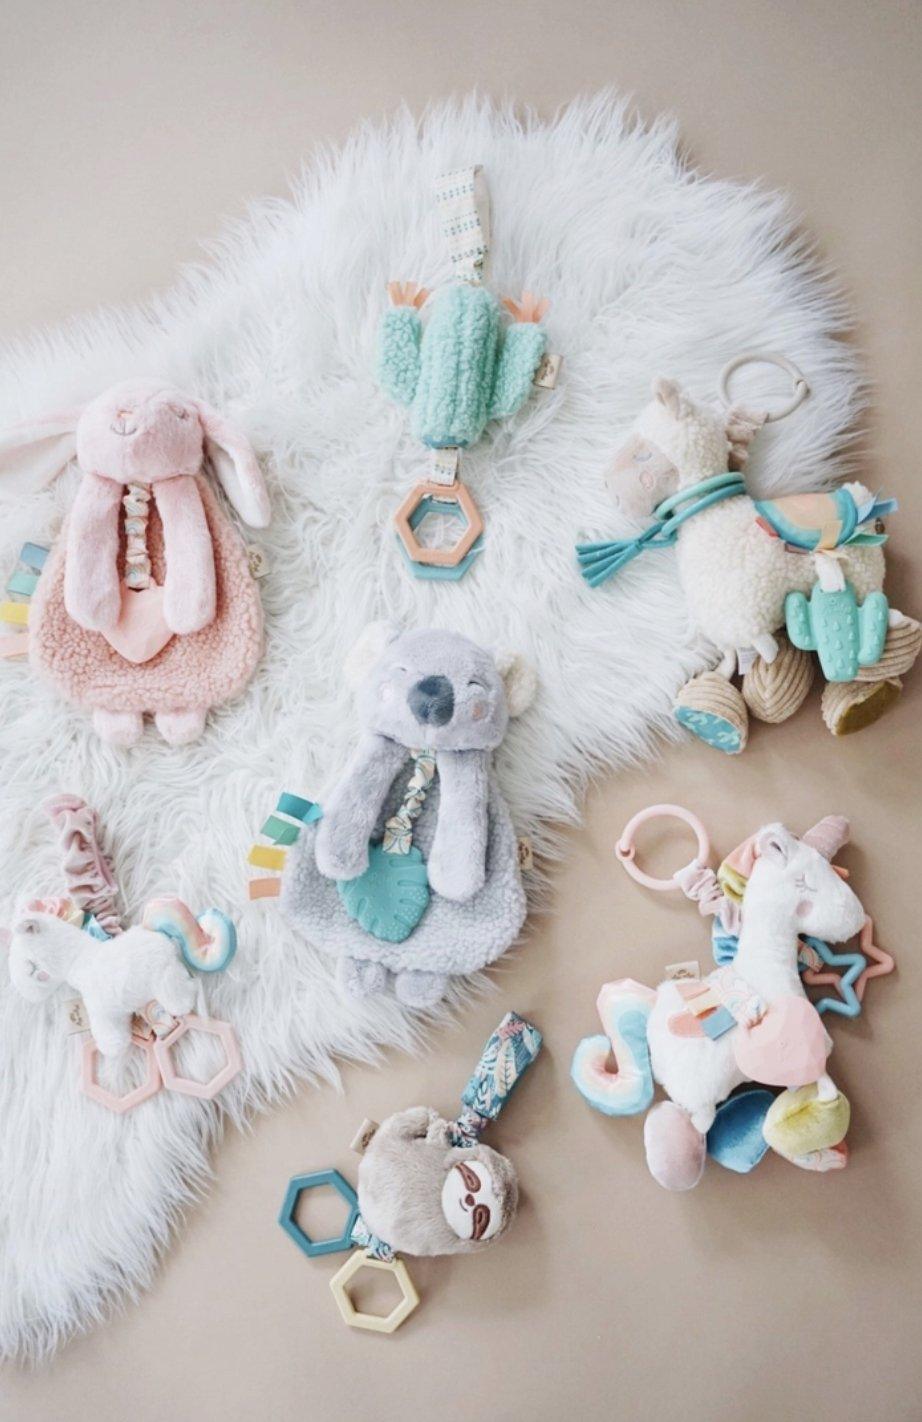 Itzy Lovey Bunny Plush with Silicone Teether Toy Baby in Styles